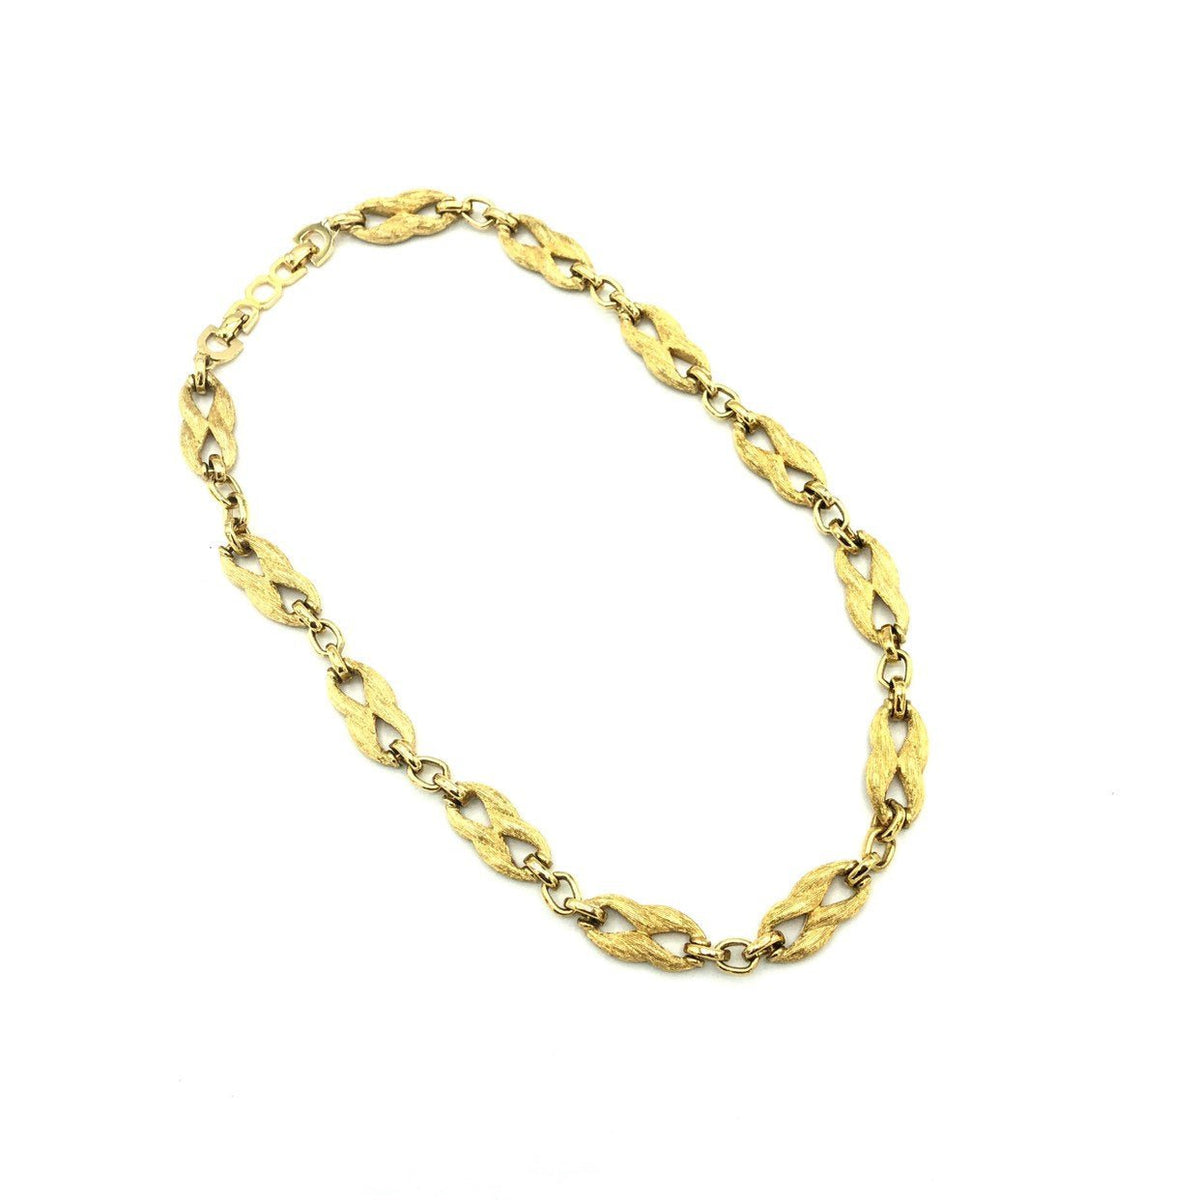 Christian Dior Classic Gold Textured Link Chain Vintage Necklace - 24 Wishes Vintage Jewelry